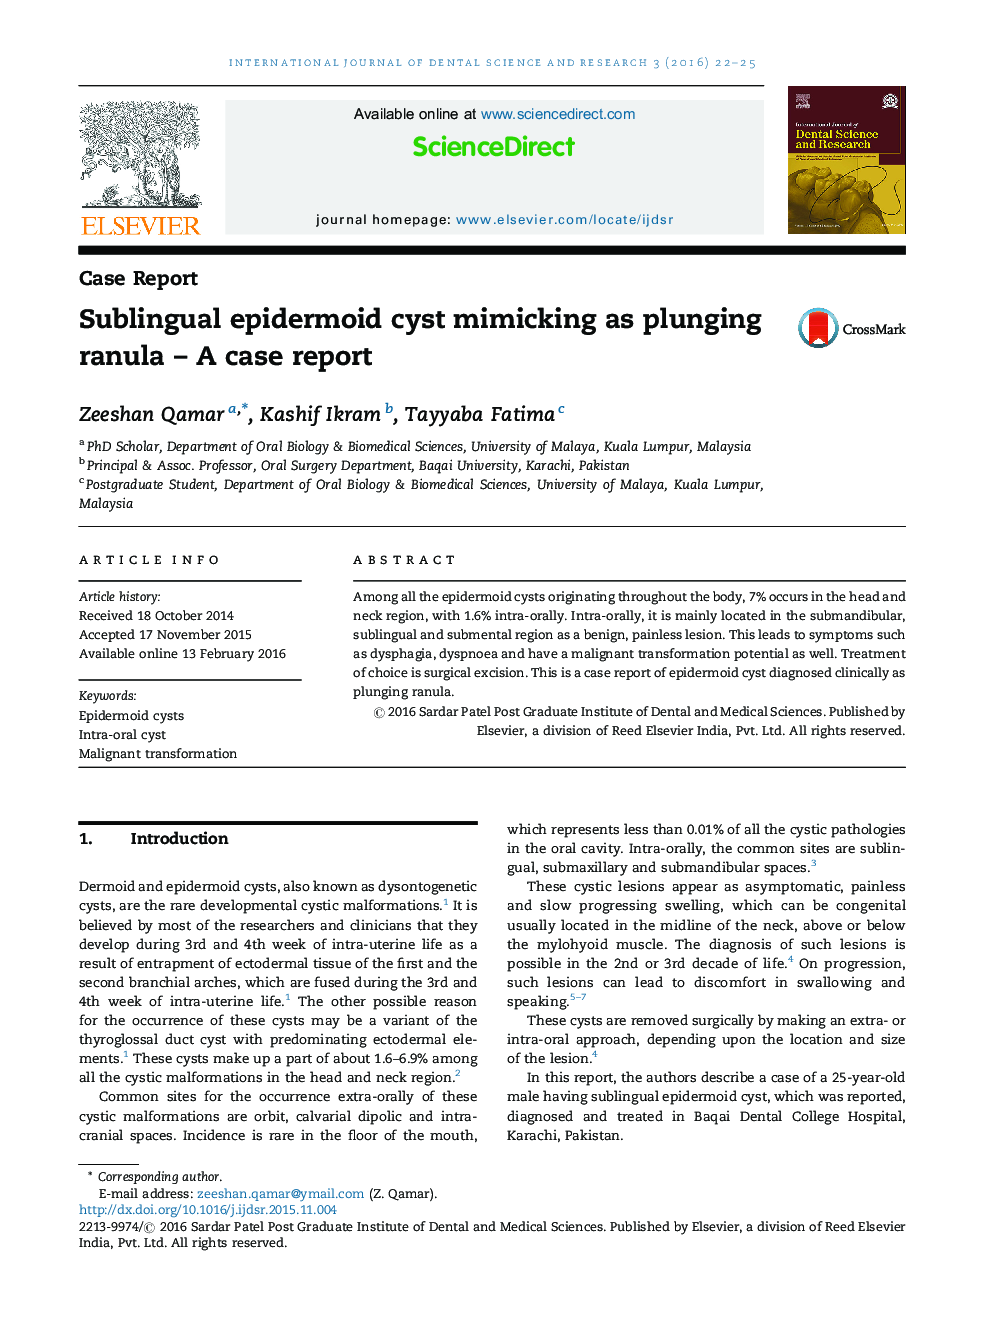 Sublingual epidermoid cyst mimicking as plunging ranula – A case report